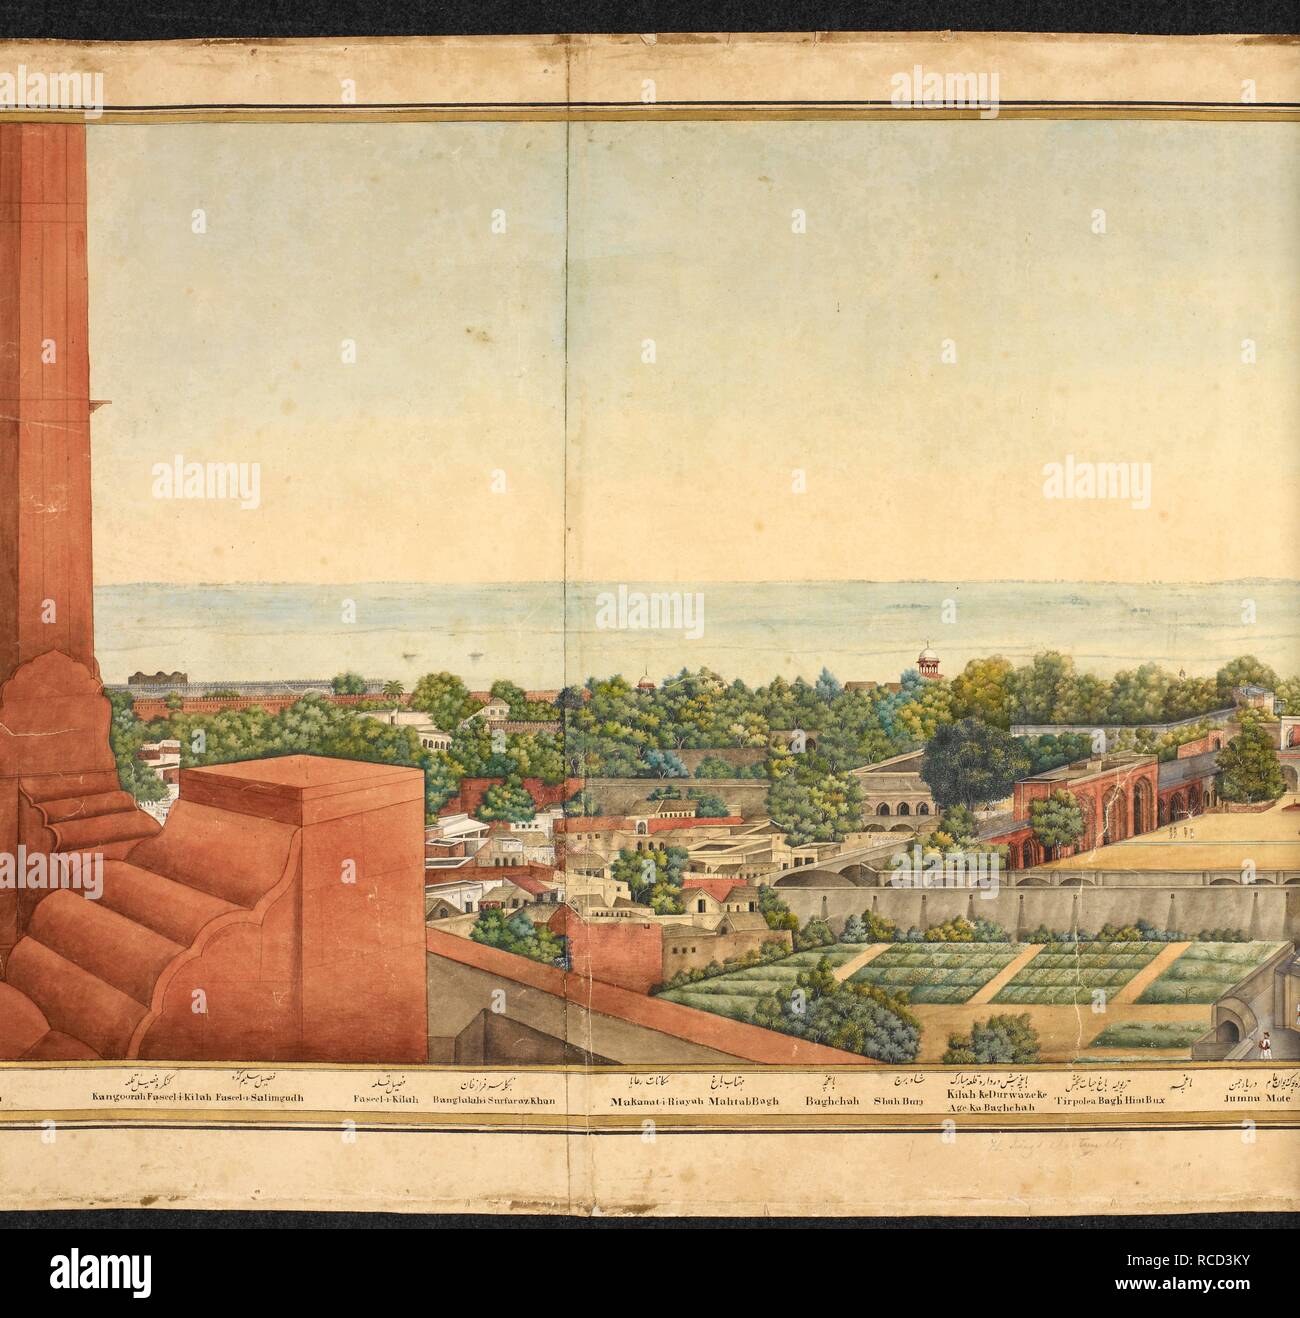 Section of a panorama of Delhi. Panorama of Delhi. 25th November 1846. A panorama of Delhi taken through almost 360Â° from the top of the Lahore Gate of the Red Fort, Delhi. Water-colour and body-colour with gold; 665 by 4908 mm (530 by 4828 mm within frame) on five sheets of paper, glued together to form a scroll. Source: Add.Or.4126. Language: Persian, English and Urdu. Author: Mazhar â€˜Ali Khan. Stock Photo